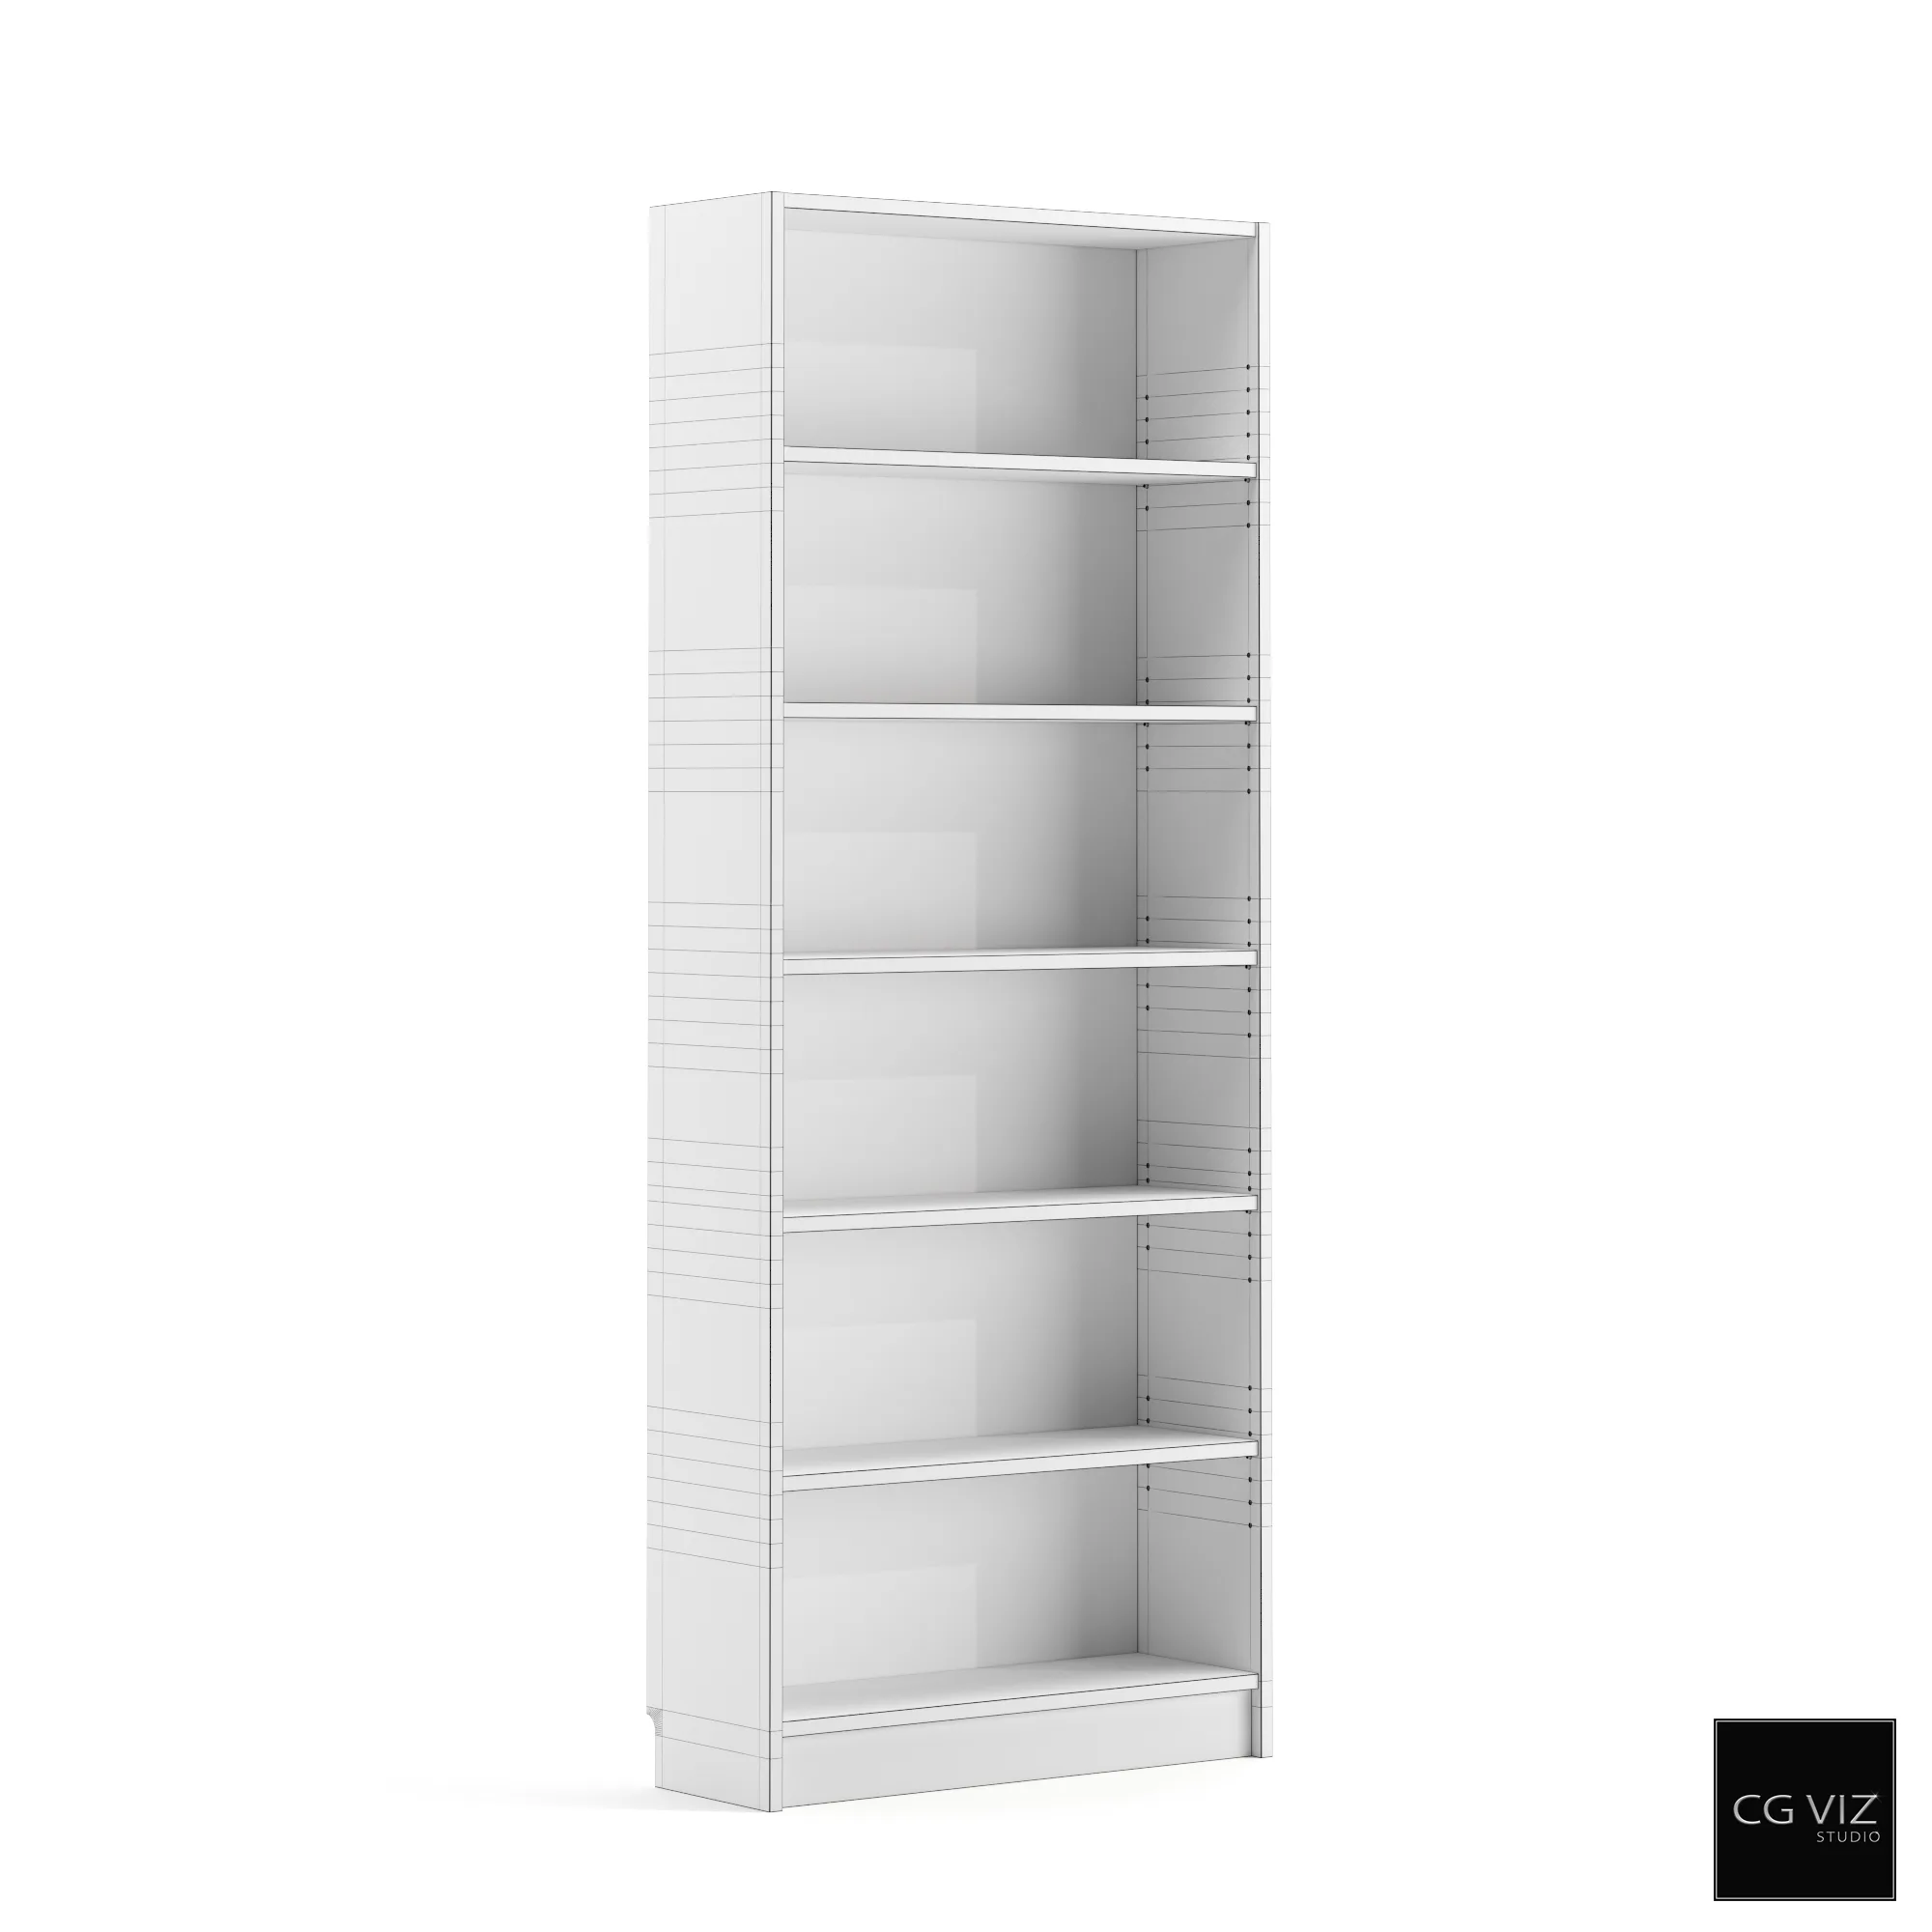 Wireframe Preview of IKEA Billy Bookcase 3D Model by CG Viz Studio